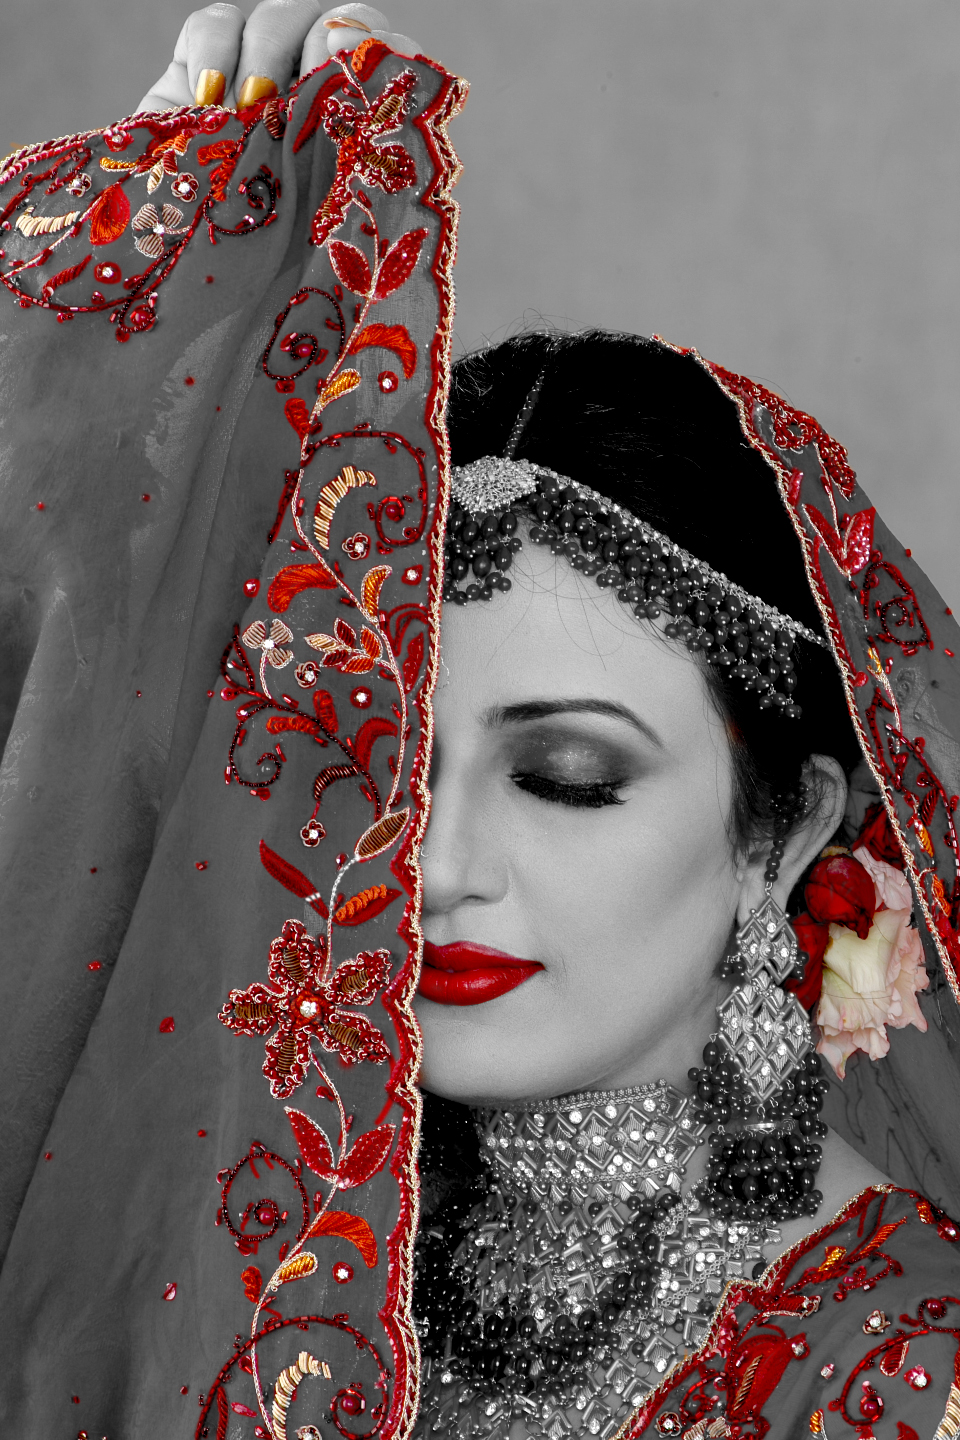 dulhan hd wallpaper,bride,tradition,photography,photo shoot,fashion accessory